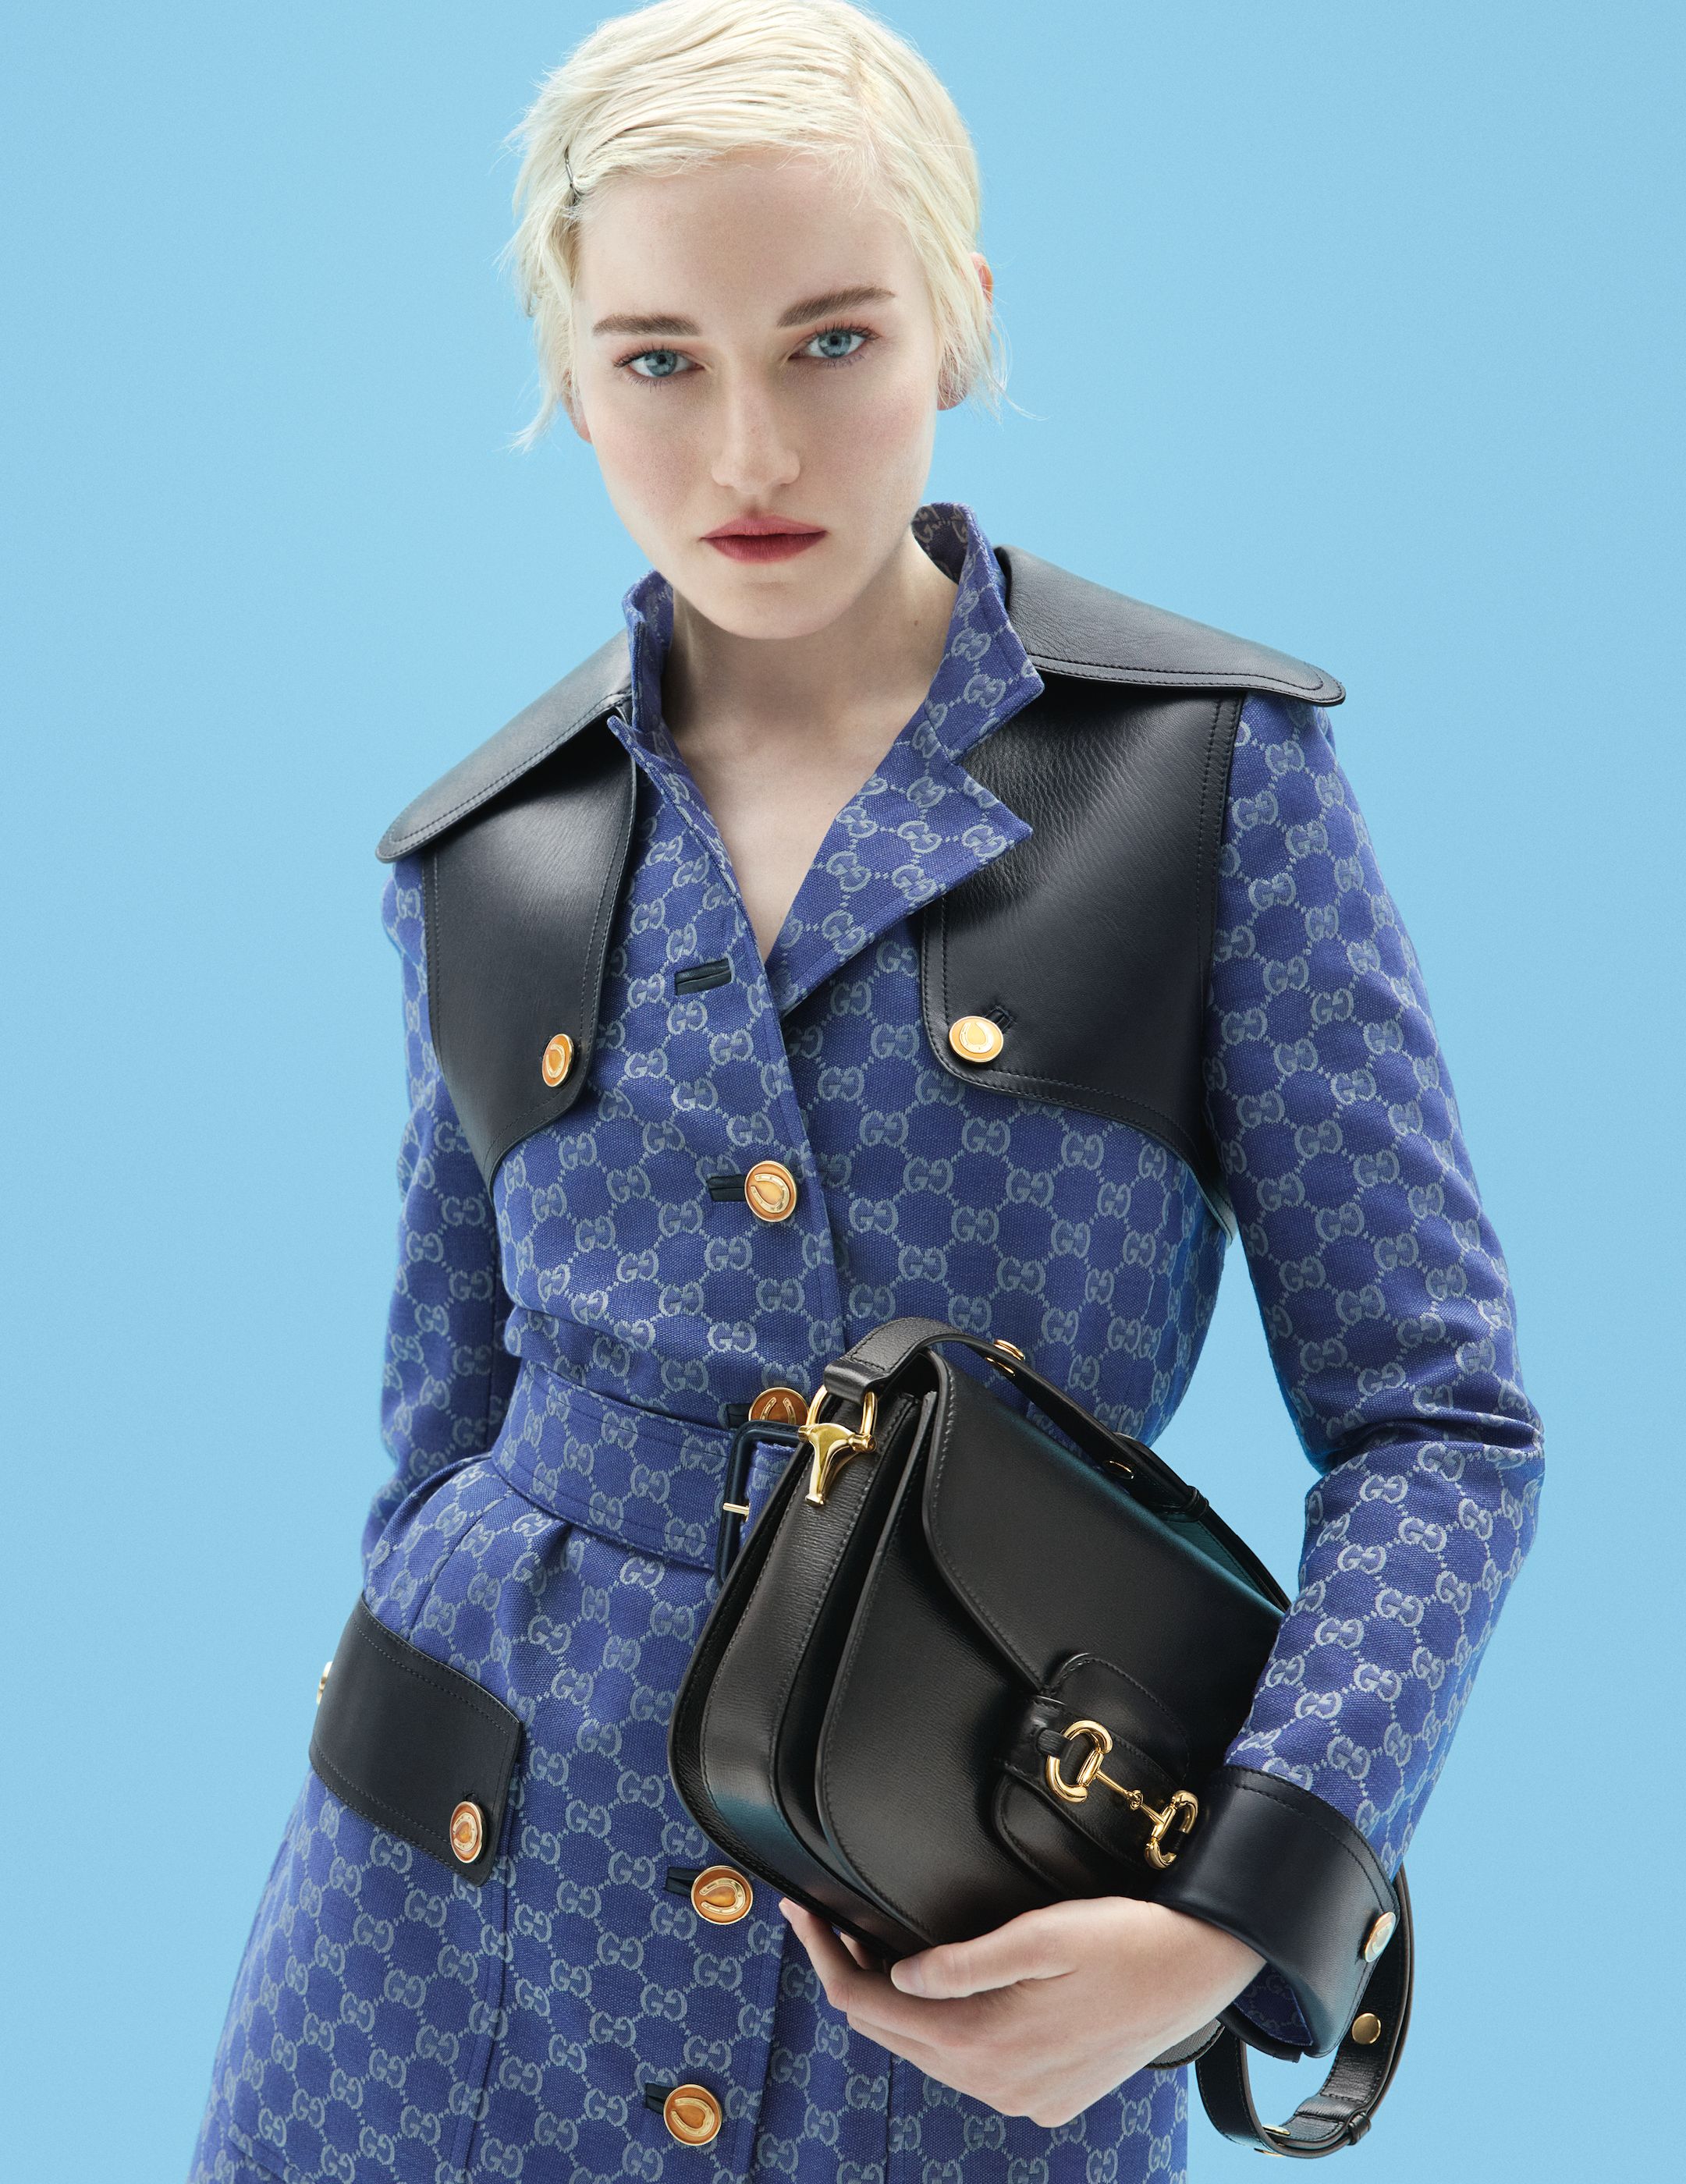 Halle Bailey, Julia Garner, and Hanni Are the New Faces of Gucci Horsebit  1955 Bag